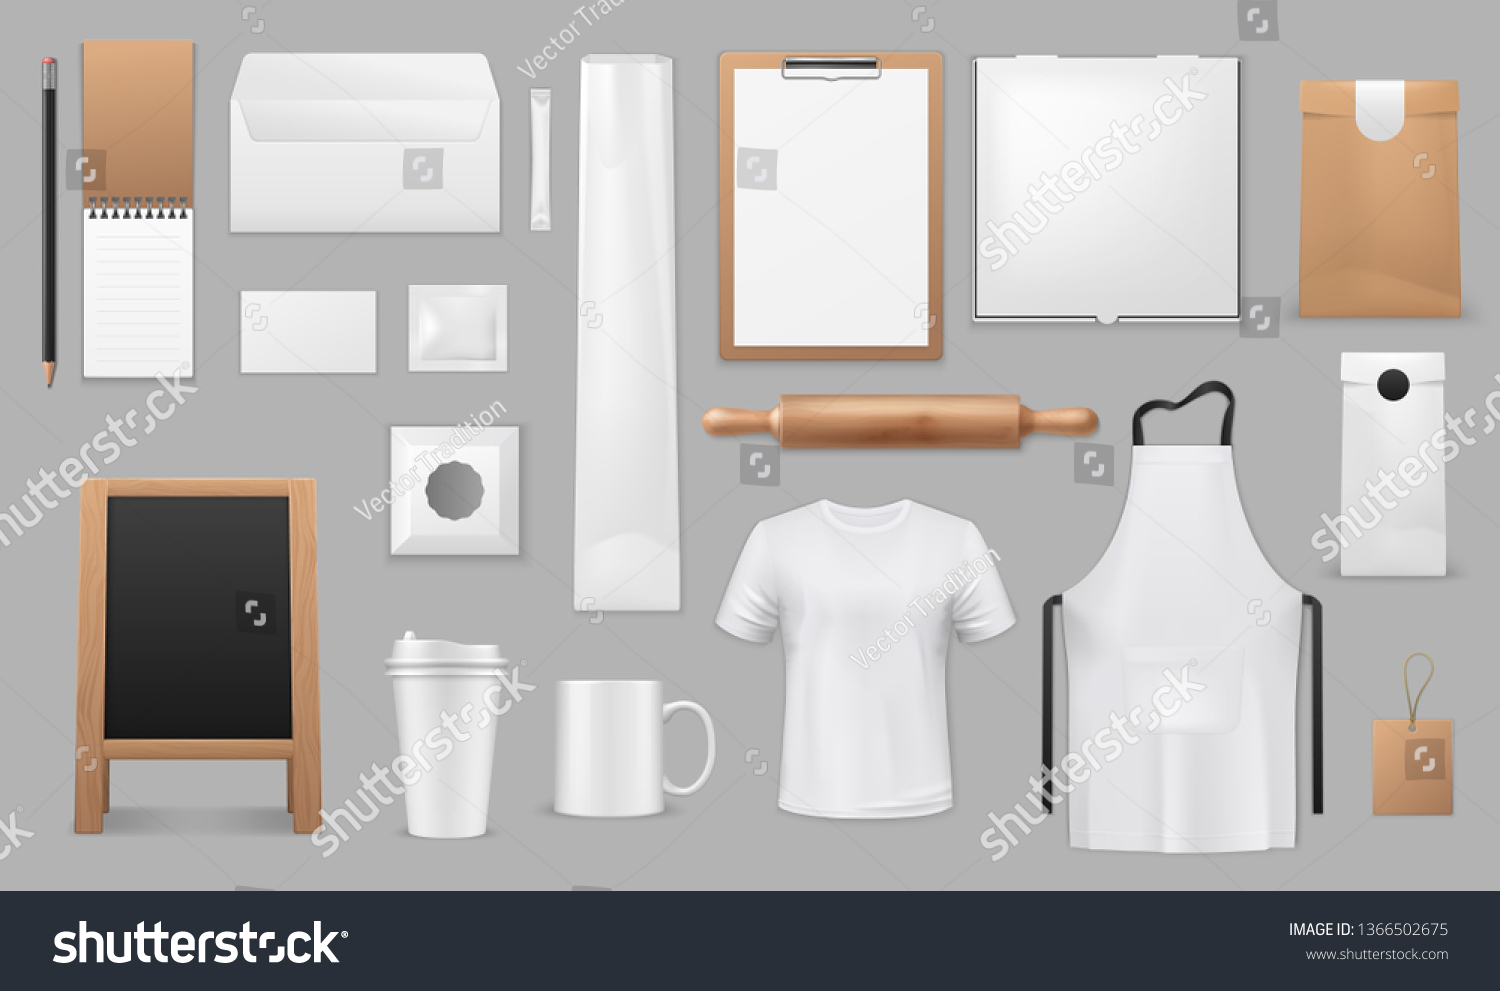 Download Kitchen Baking Tools Cooking Equipment Chef Stock Vector Royalty Free 1366502675 PSD Mockup Templates